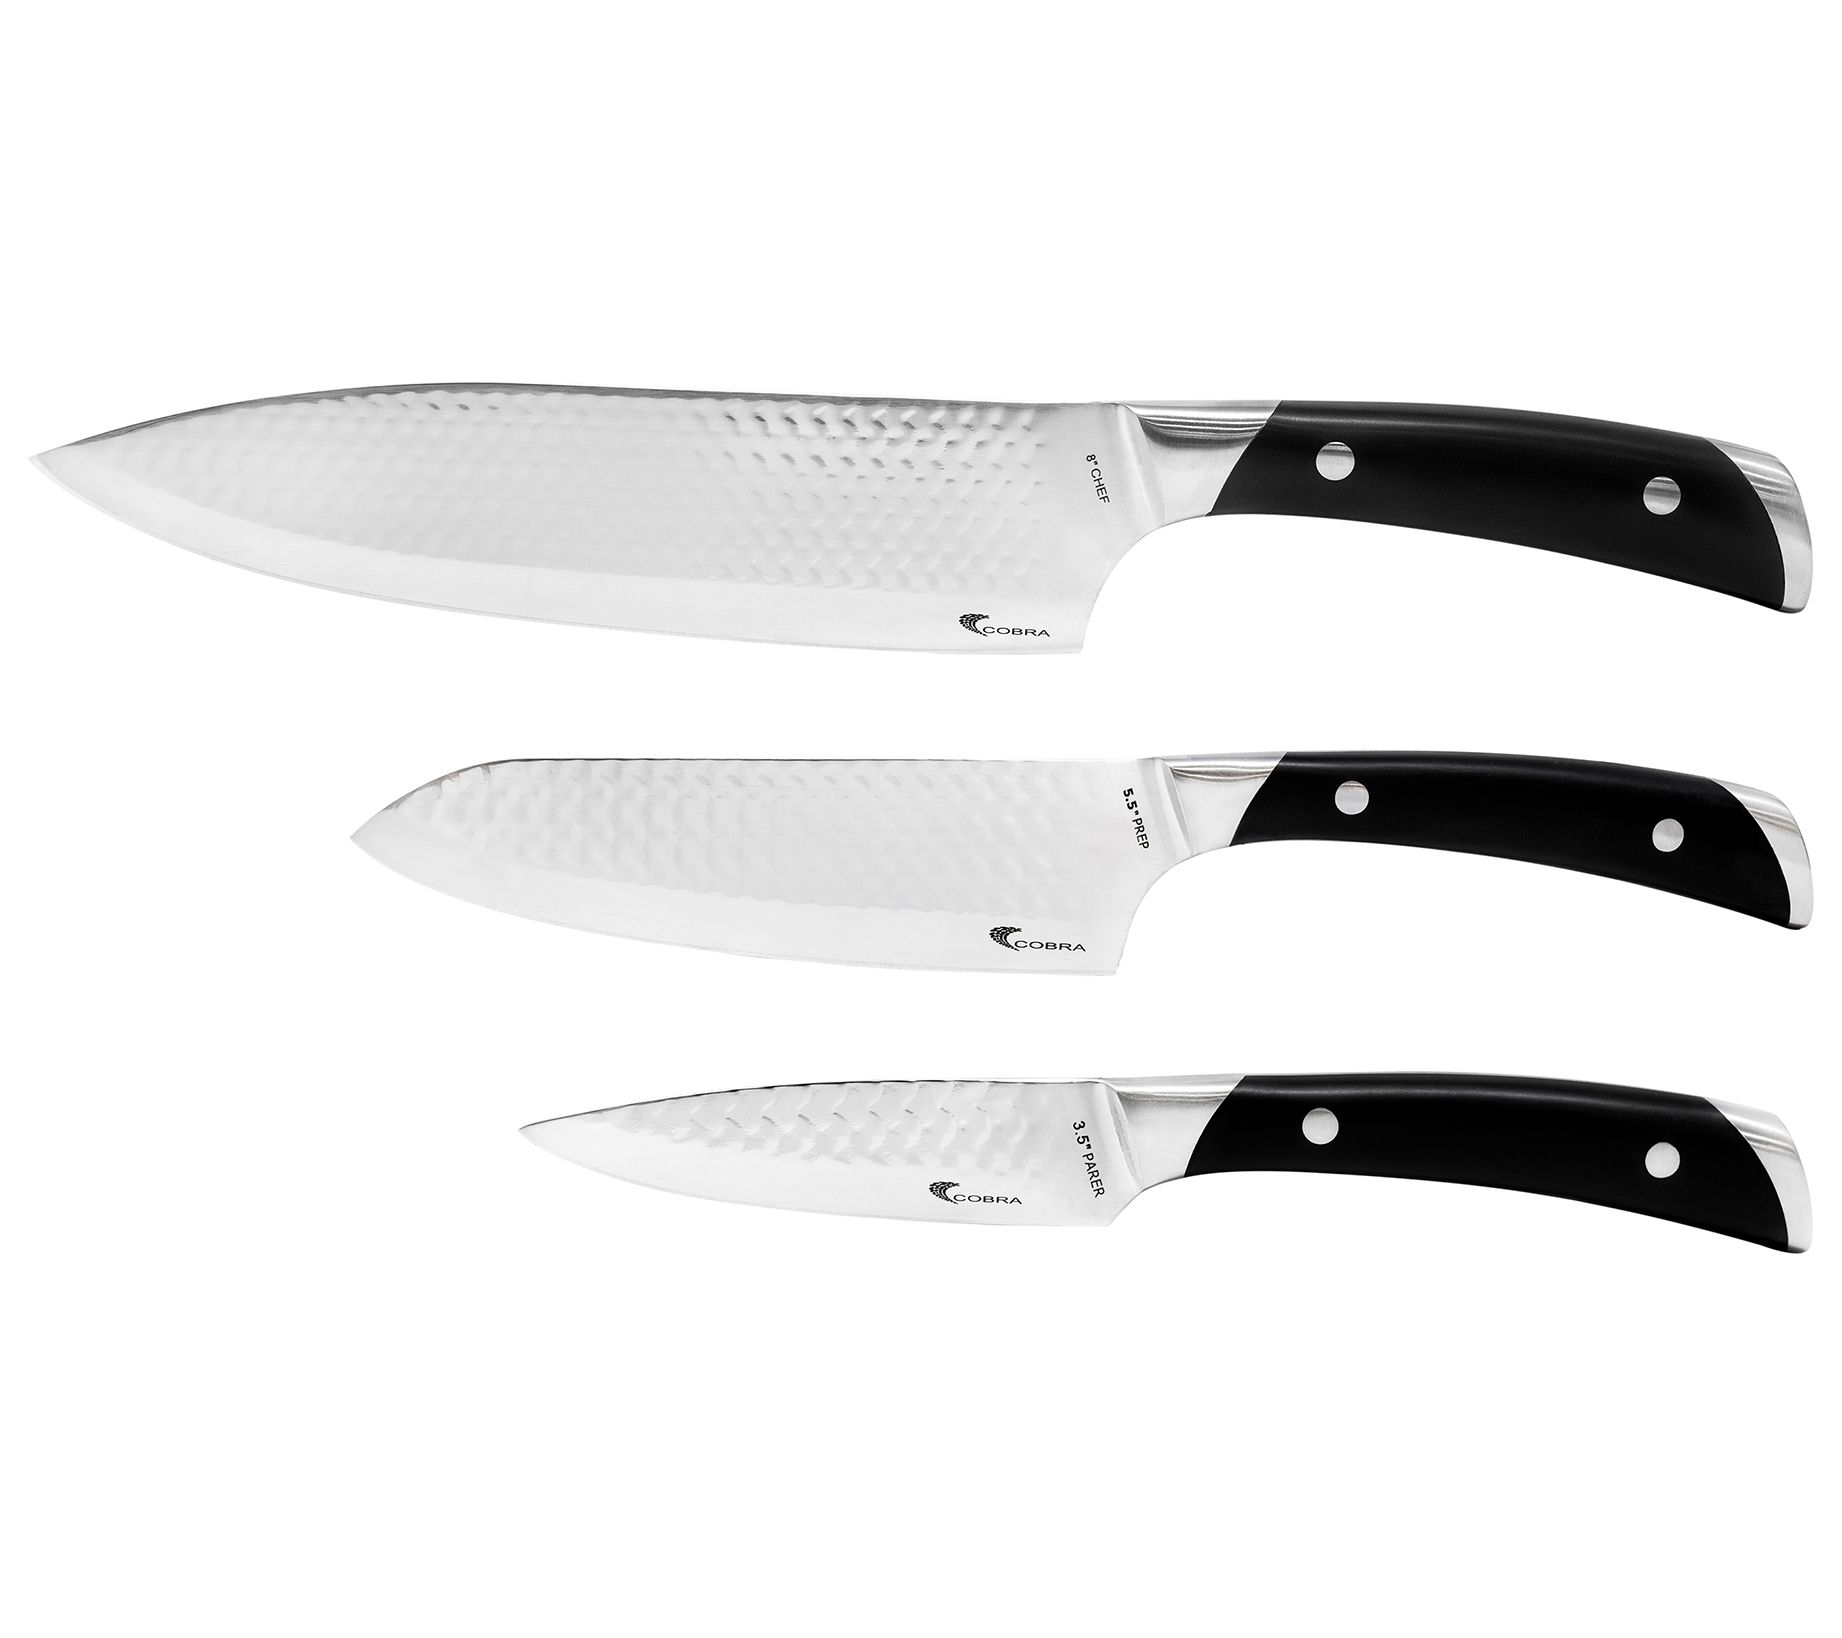  Hammer Stahl 4 Piece Knife Set, Chef Essential Kitchen Knife  Set, Stainless Steel Knife Set with Bread, Chef, Santoku, & Paring Knives, Classic Chef Knife Set